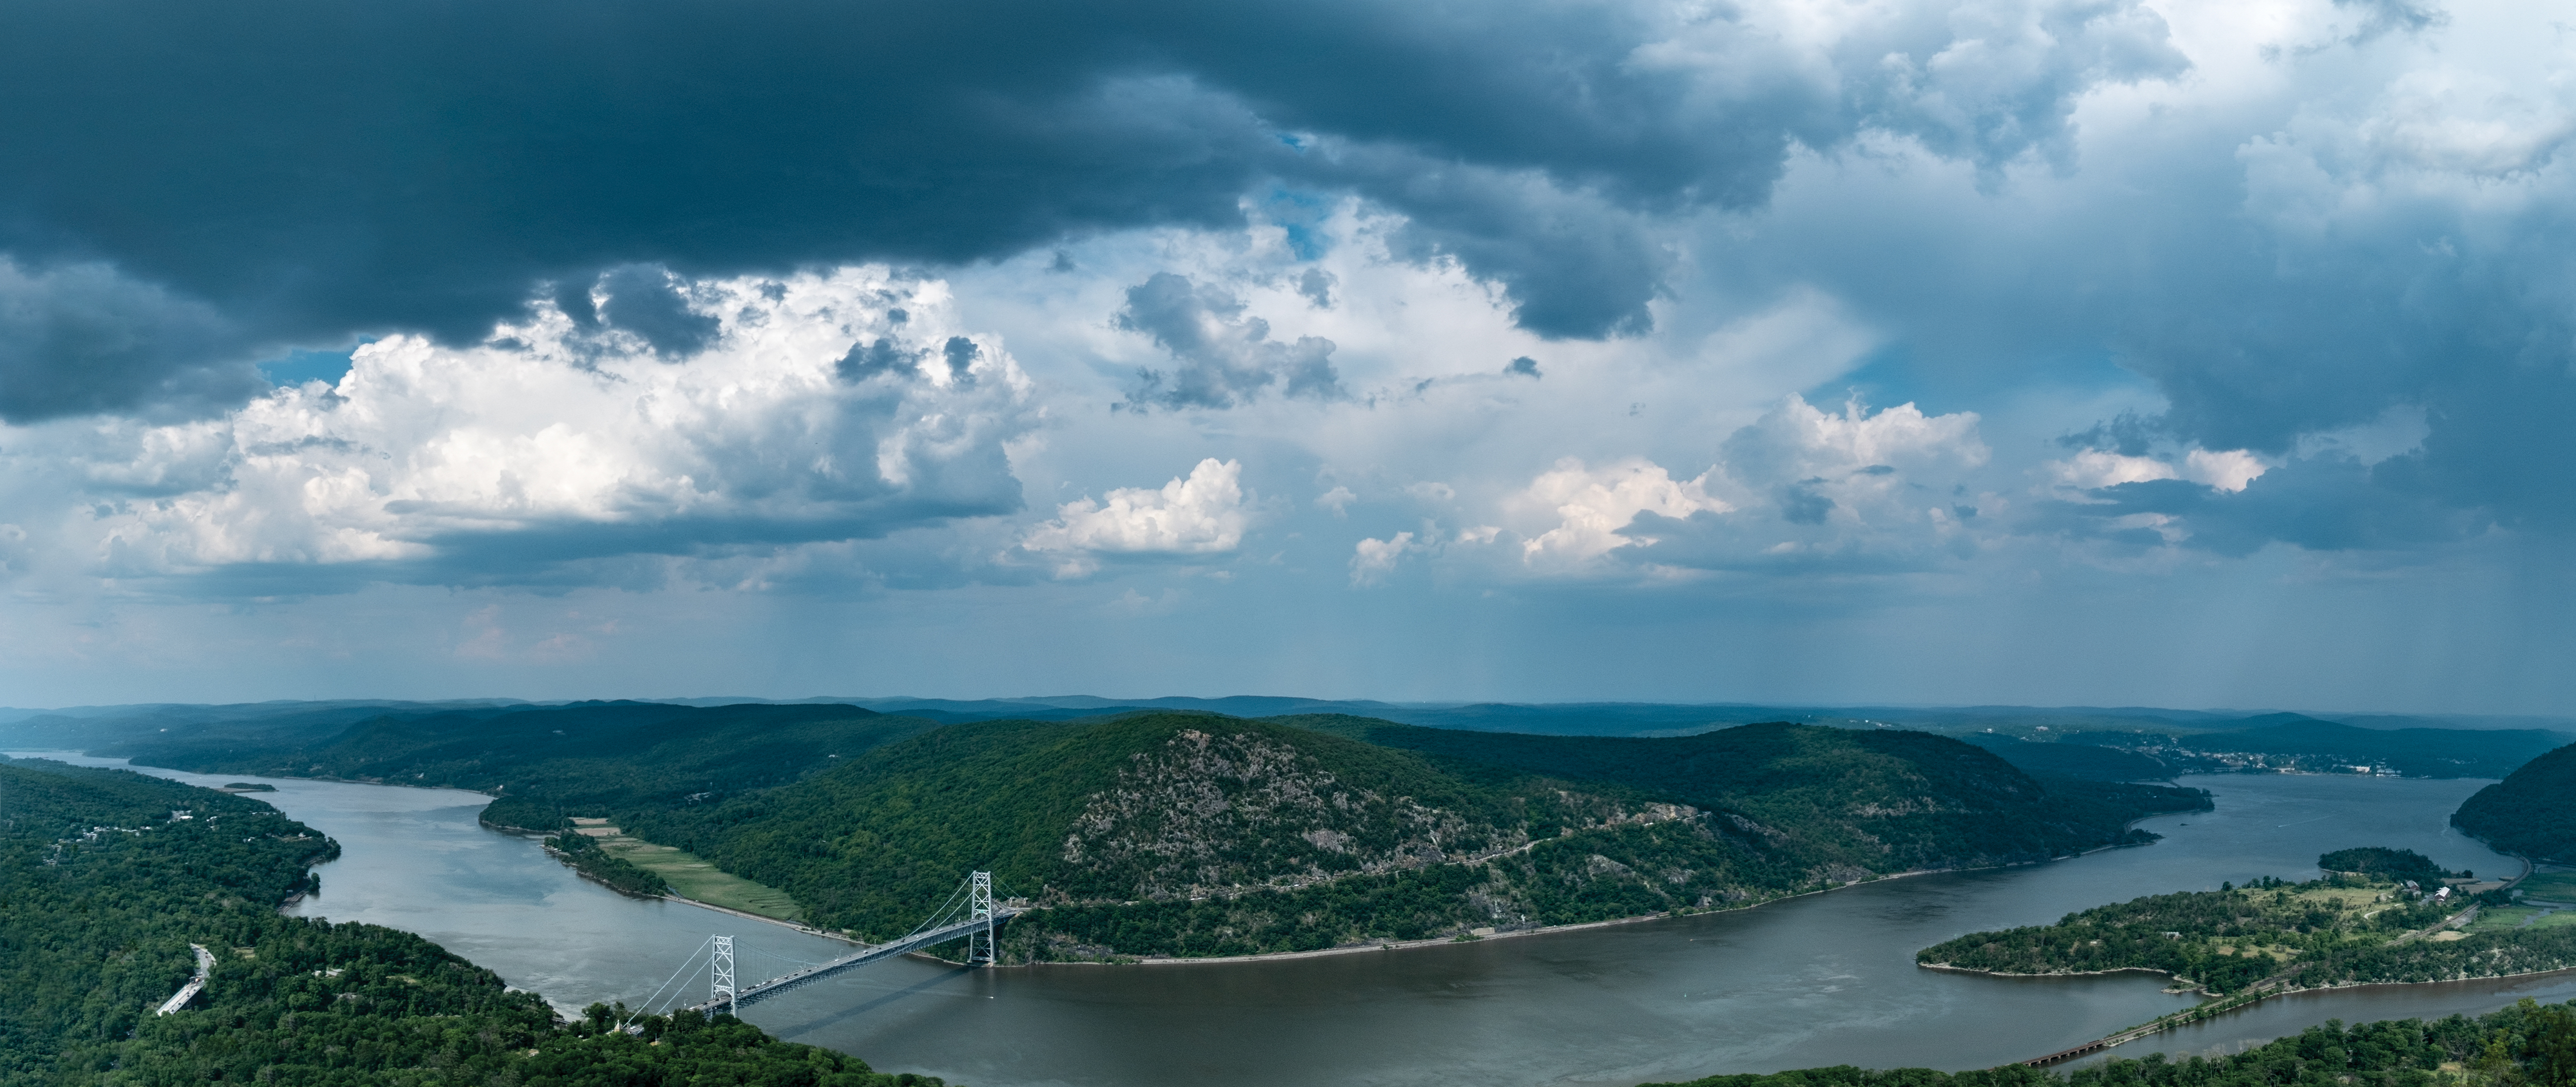 General 5120x2160 New York state landscape sky mountains hills Hudson River summer nature bridge Bear Mountain water clouds overcast river